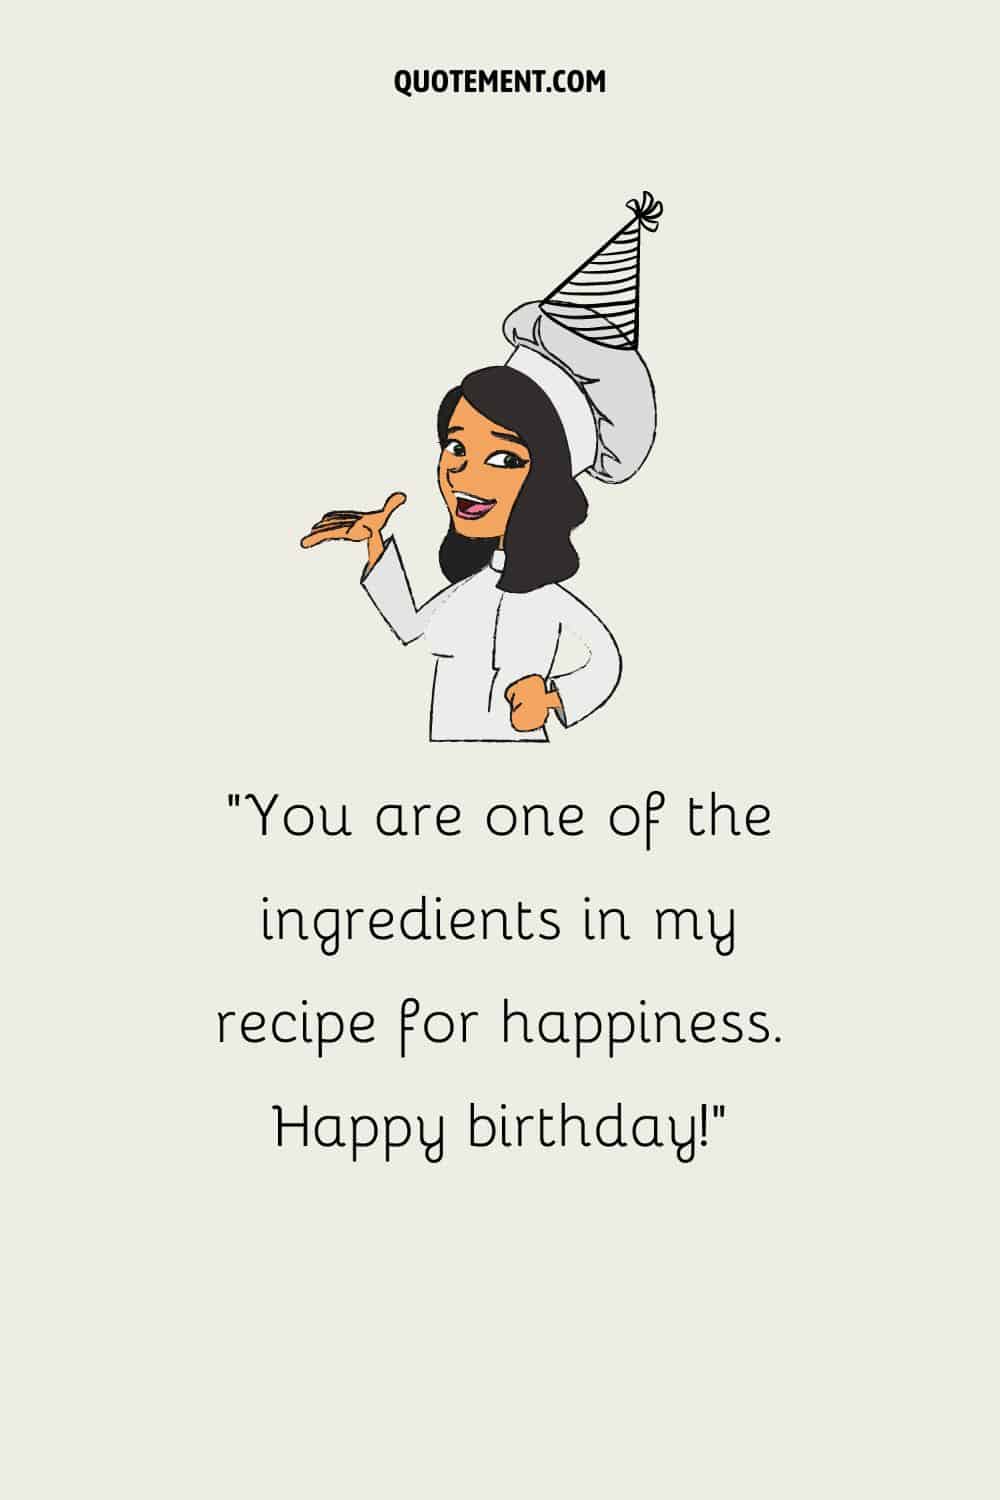 Cute illustration of a female chef representing a sweet birthday greeting for a chef.
